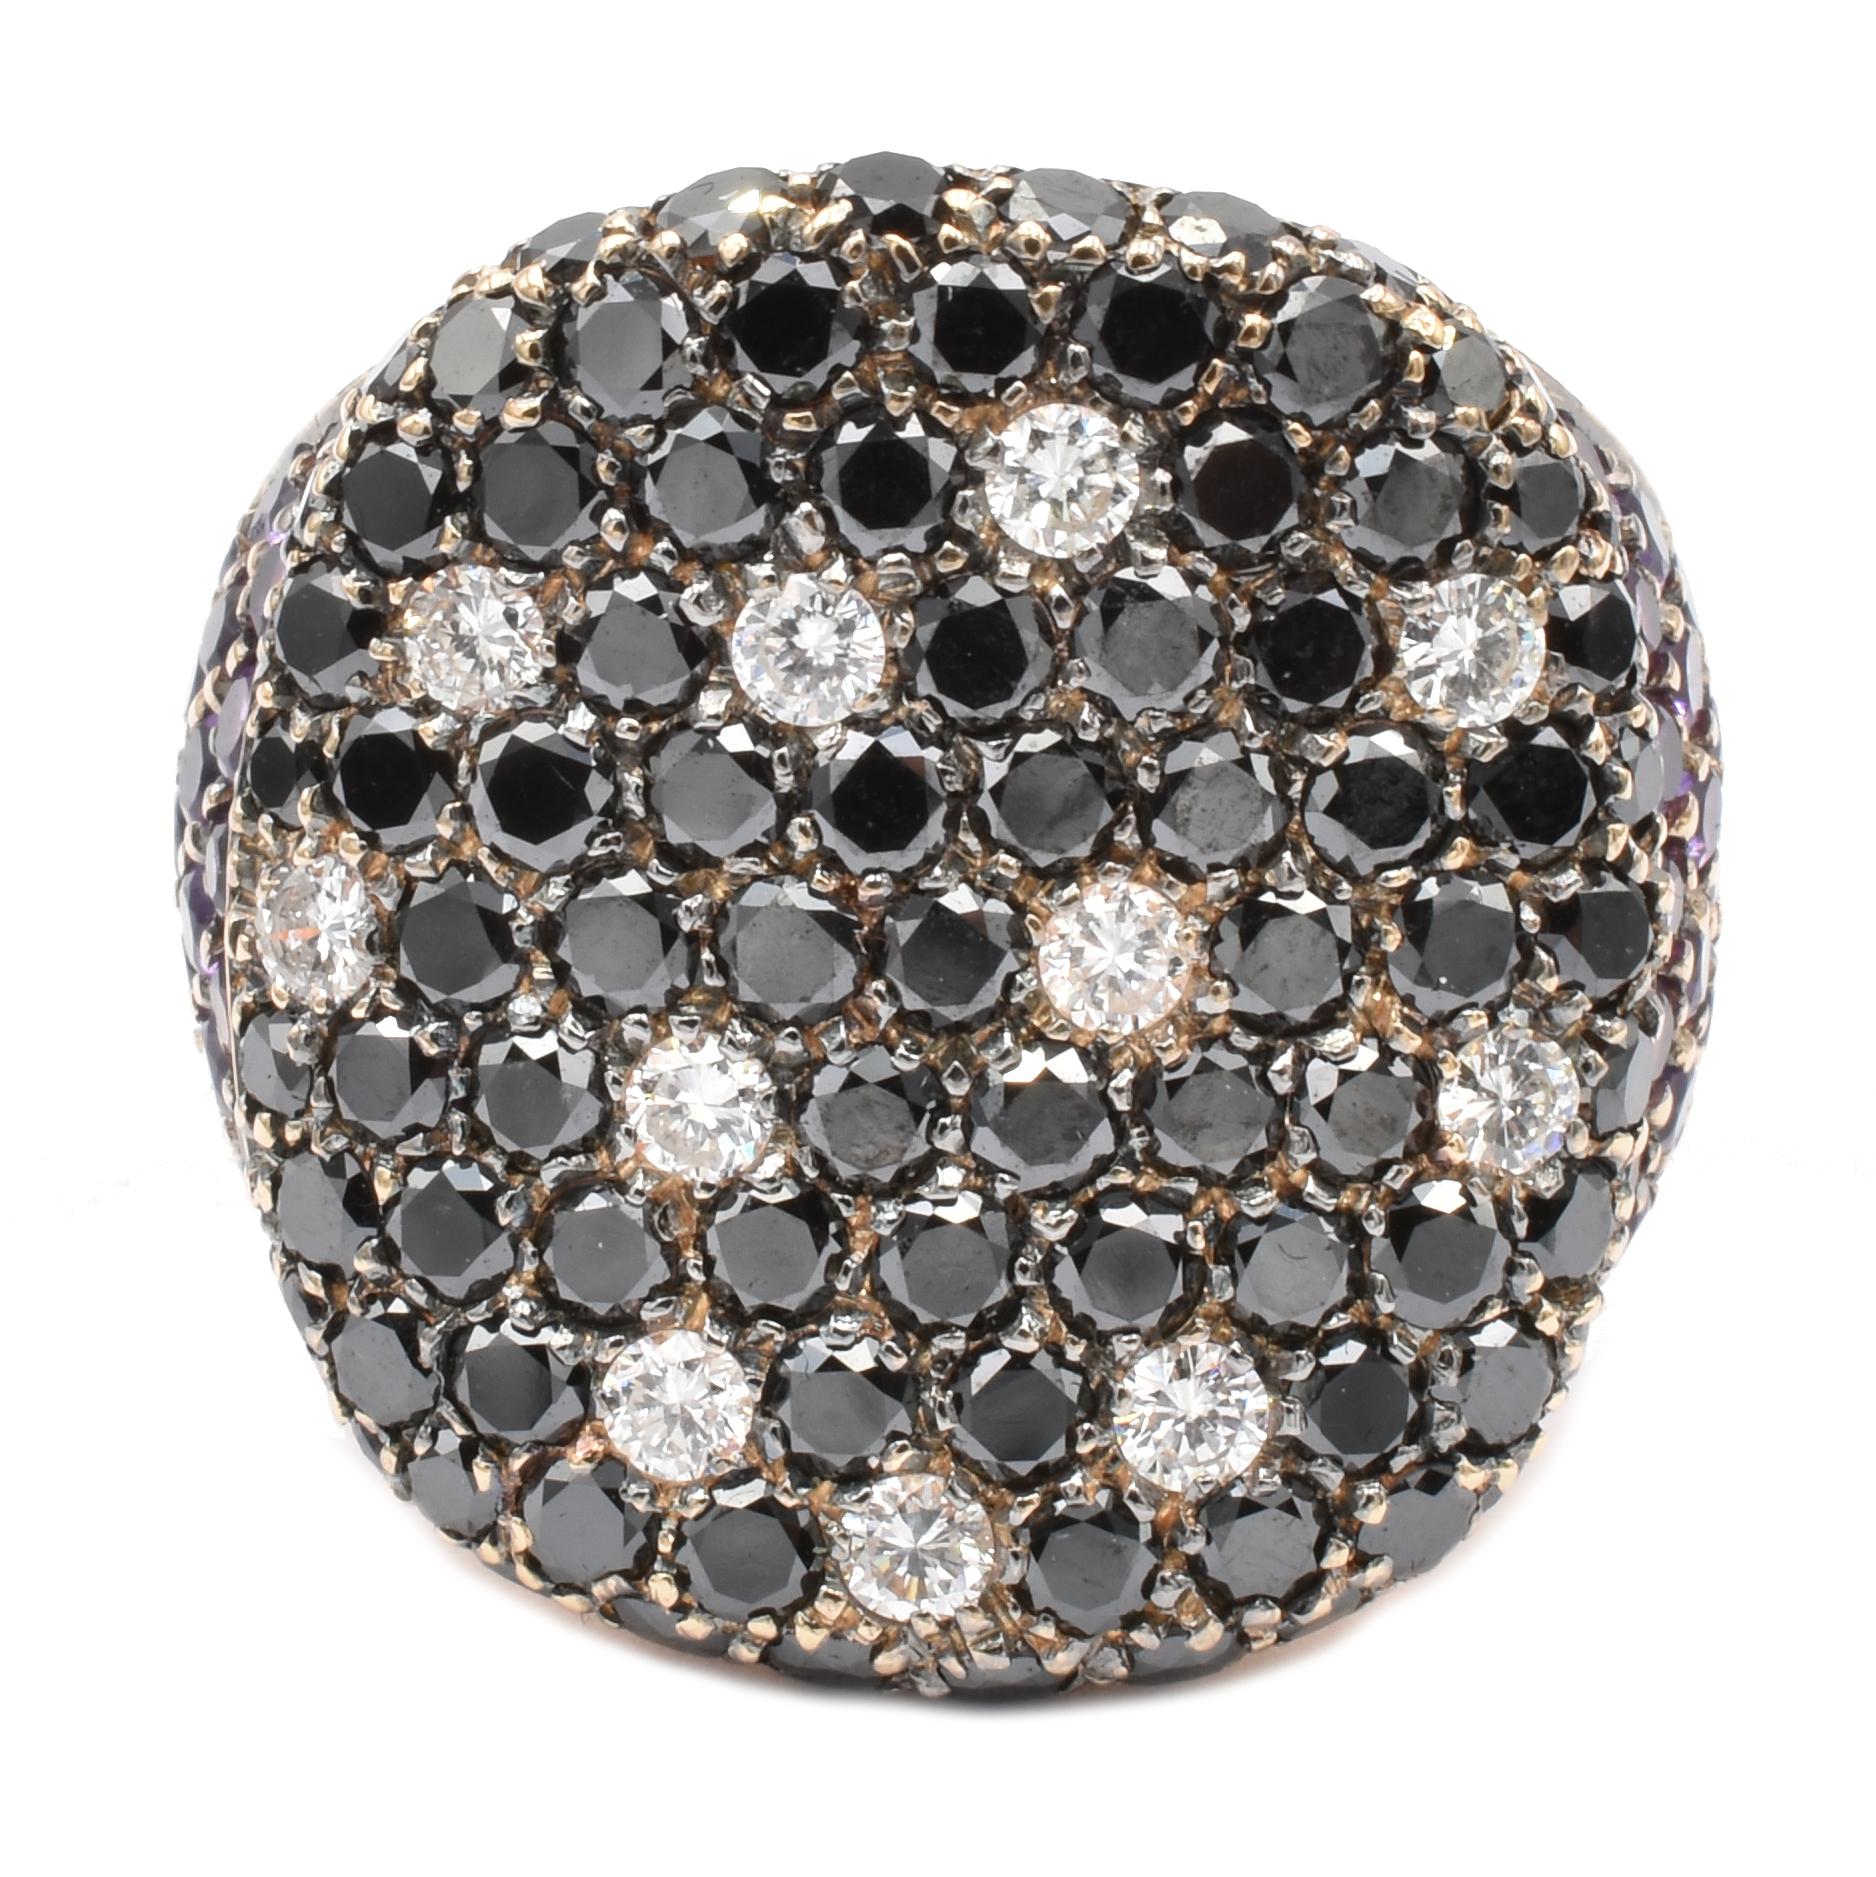 Gilberto Cassola 18Kt Rose Gold Ring with Black Diamonds and Amethyst set on Black Rhodium Plated 18Kt Gold. Some White Diamonds spots on the Black Paveé.
Handmade in our Atelier in Valenza AL.
18Kt White Gold g 12.20
Black Diamonds ct 2.95
G Color